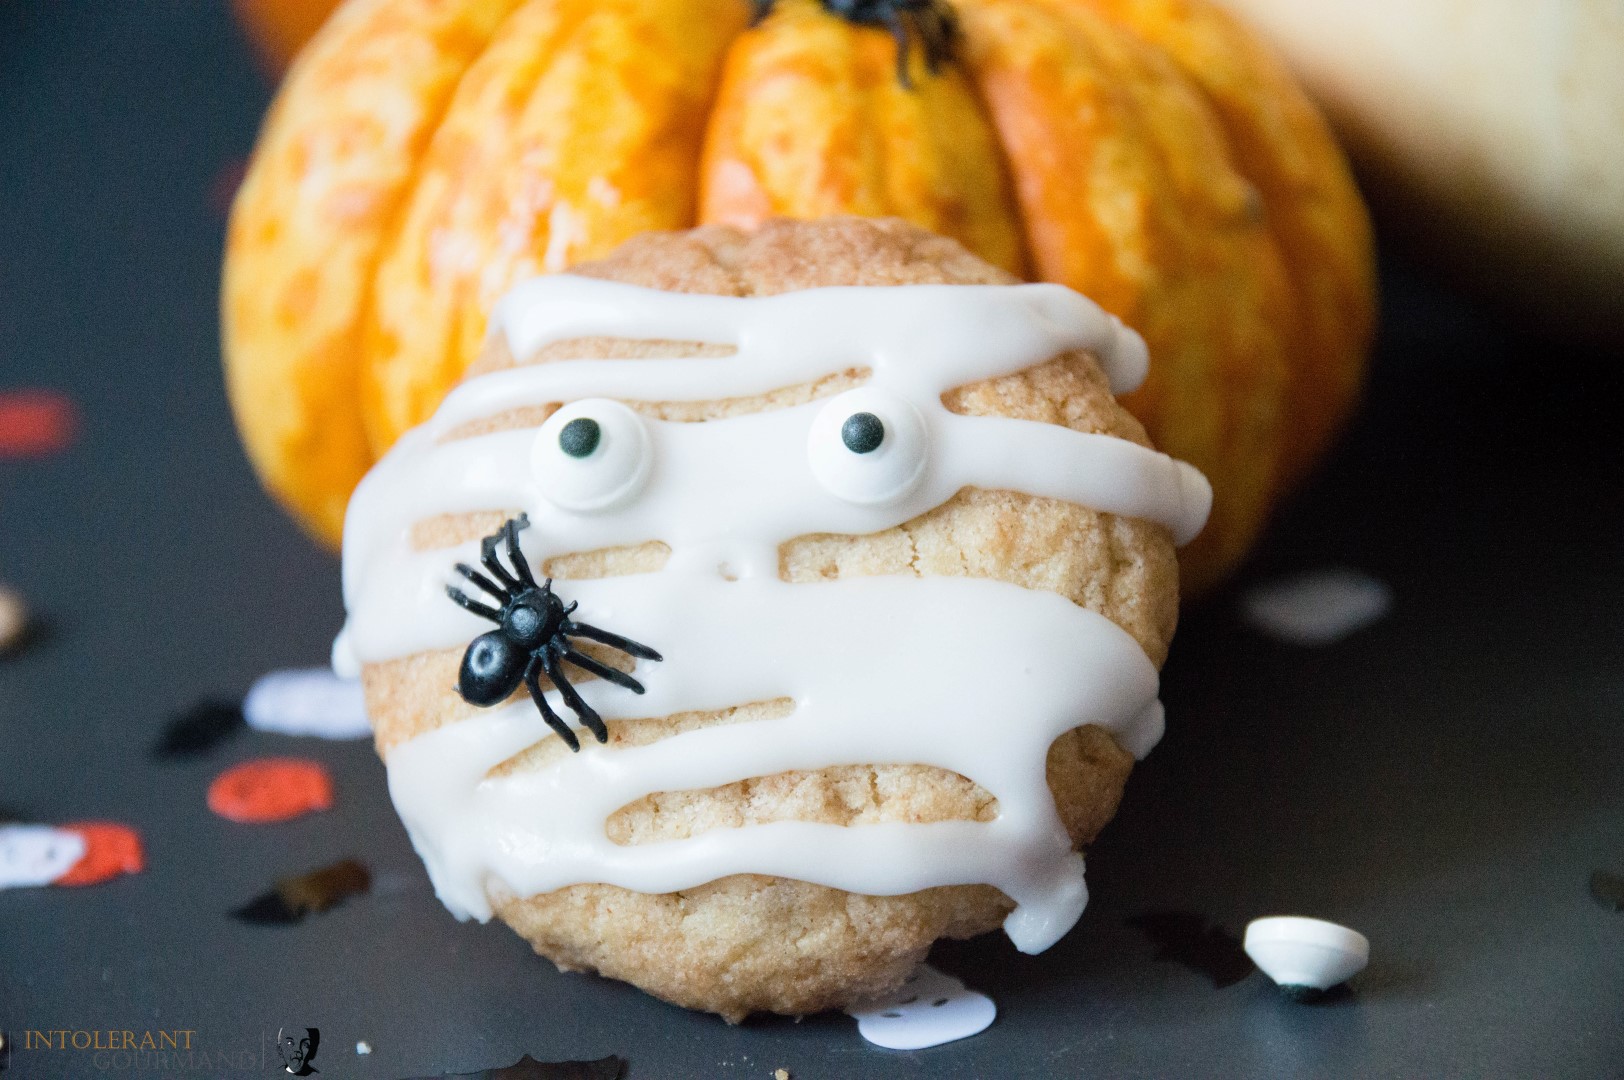 Halloween Cookies - delicious gluten-free and vegan pumpkin spiced cookies, perfect for halloween treats, or simply just because. So quick and easy to make, little ones will love to help! www.intolerantgourmand.com